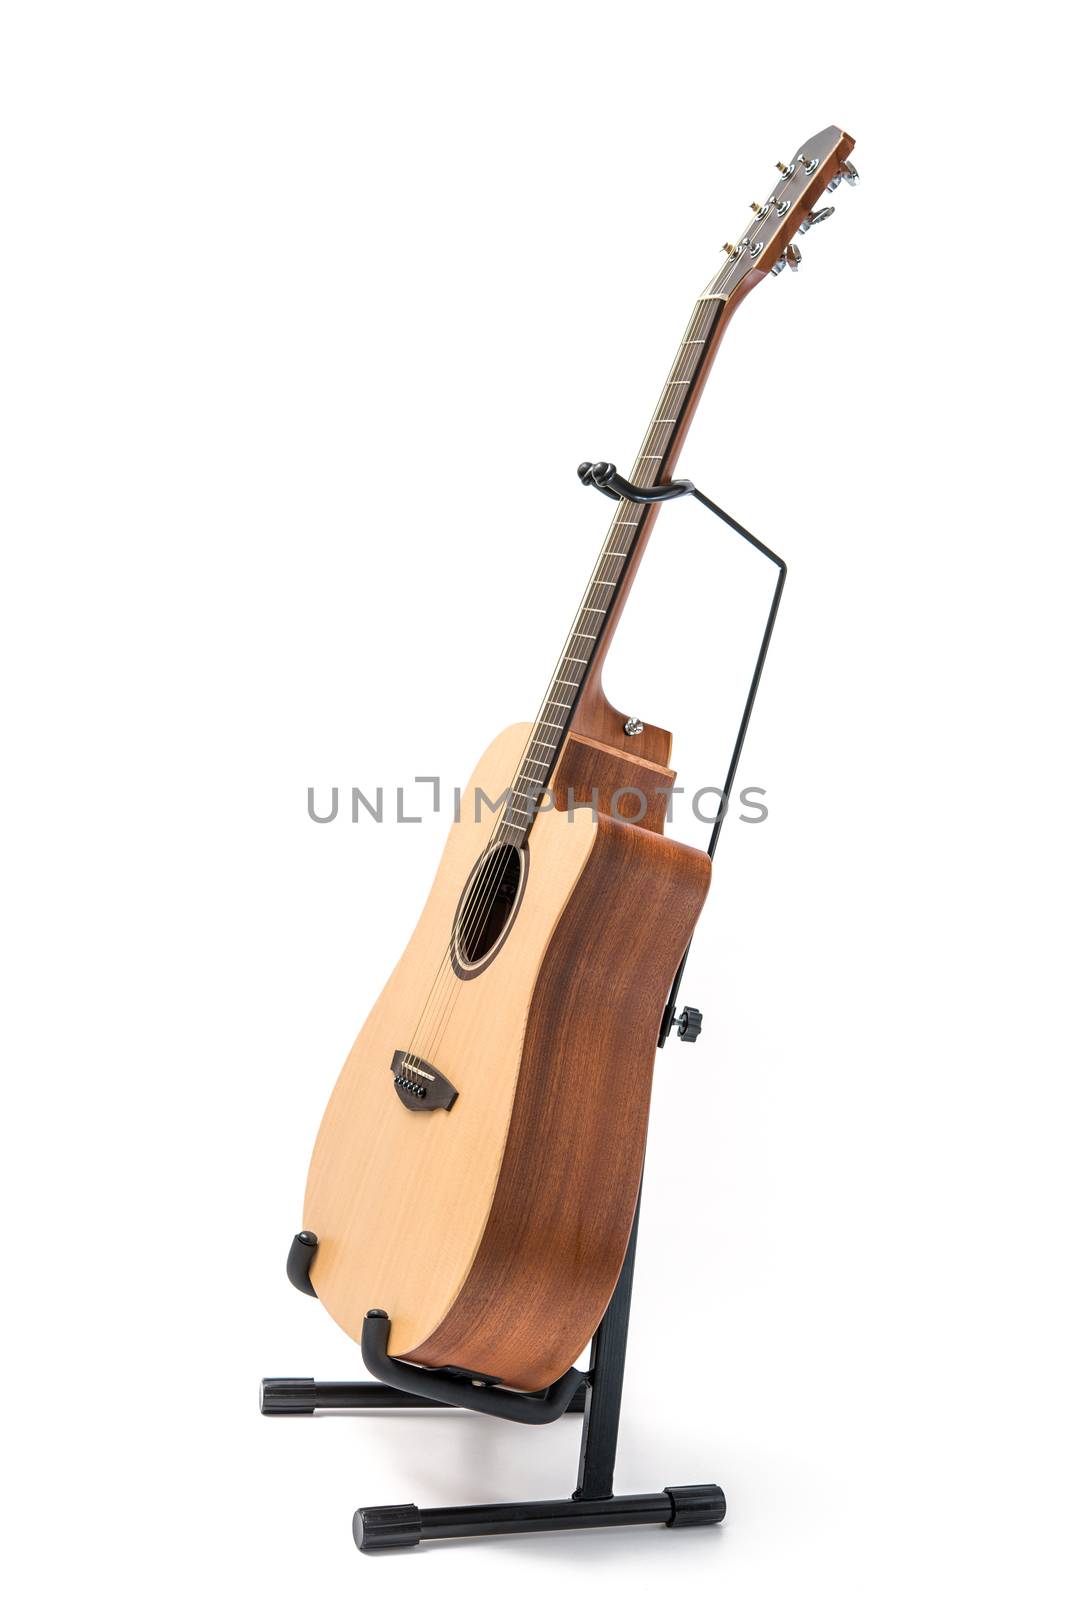 acoustic guitar with stand isolated on white background by antpkr